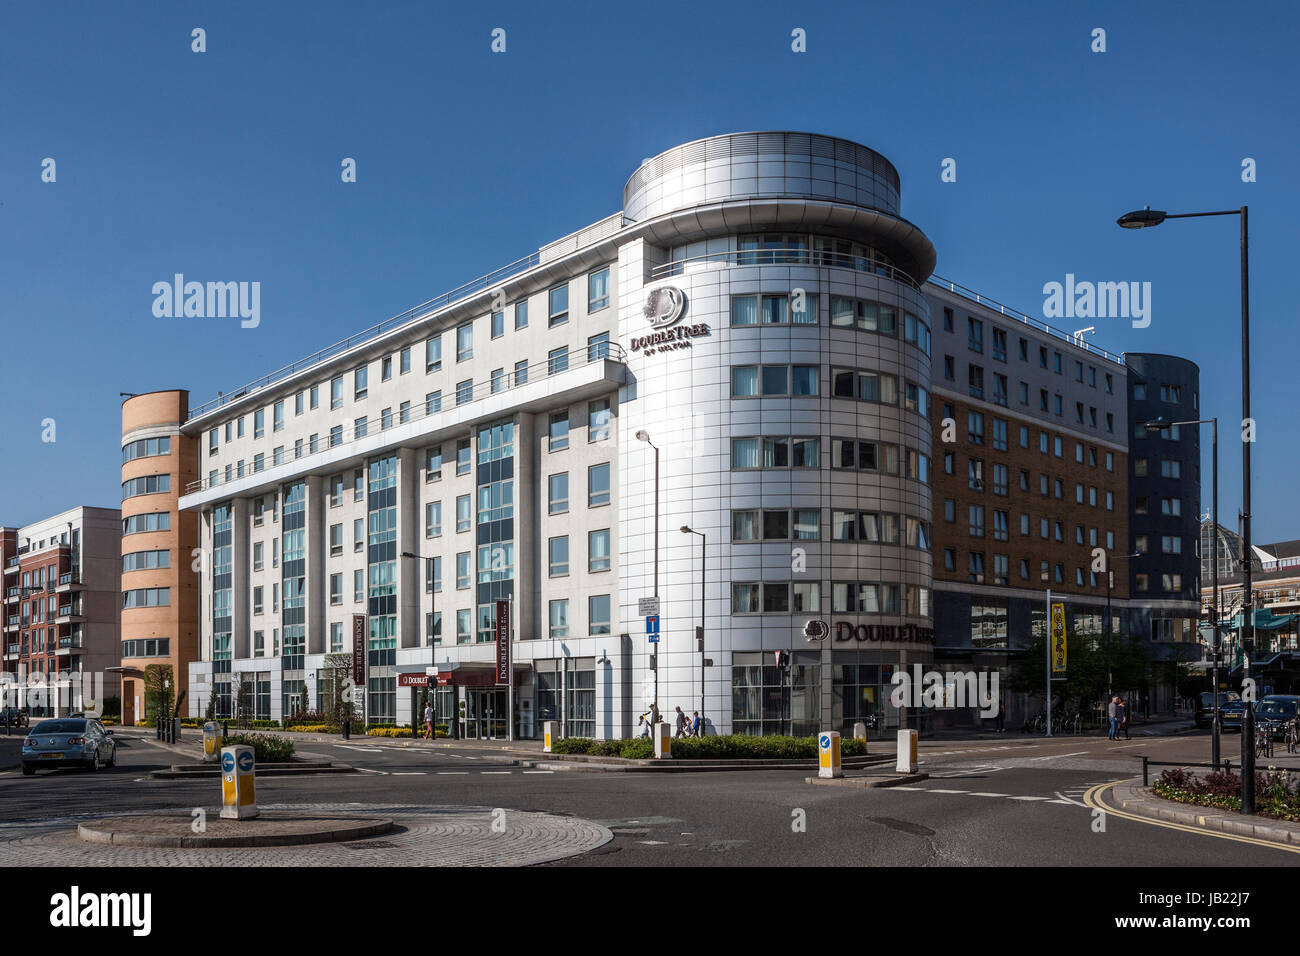 Double Tree by Hilton Hotel, Imperial Road, Fulham, London Stock Photo